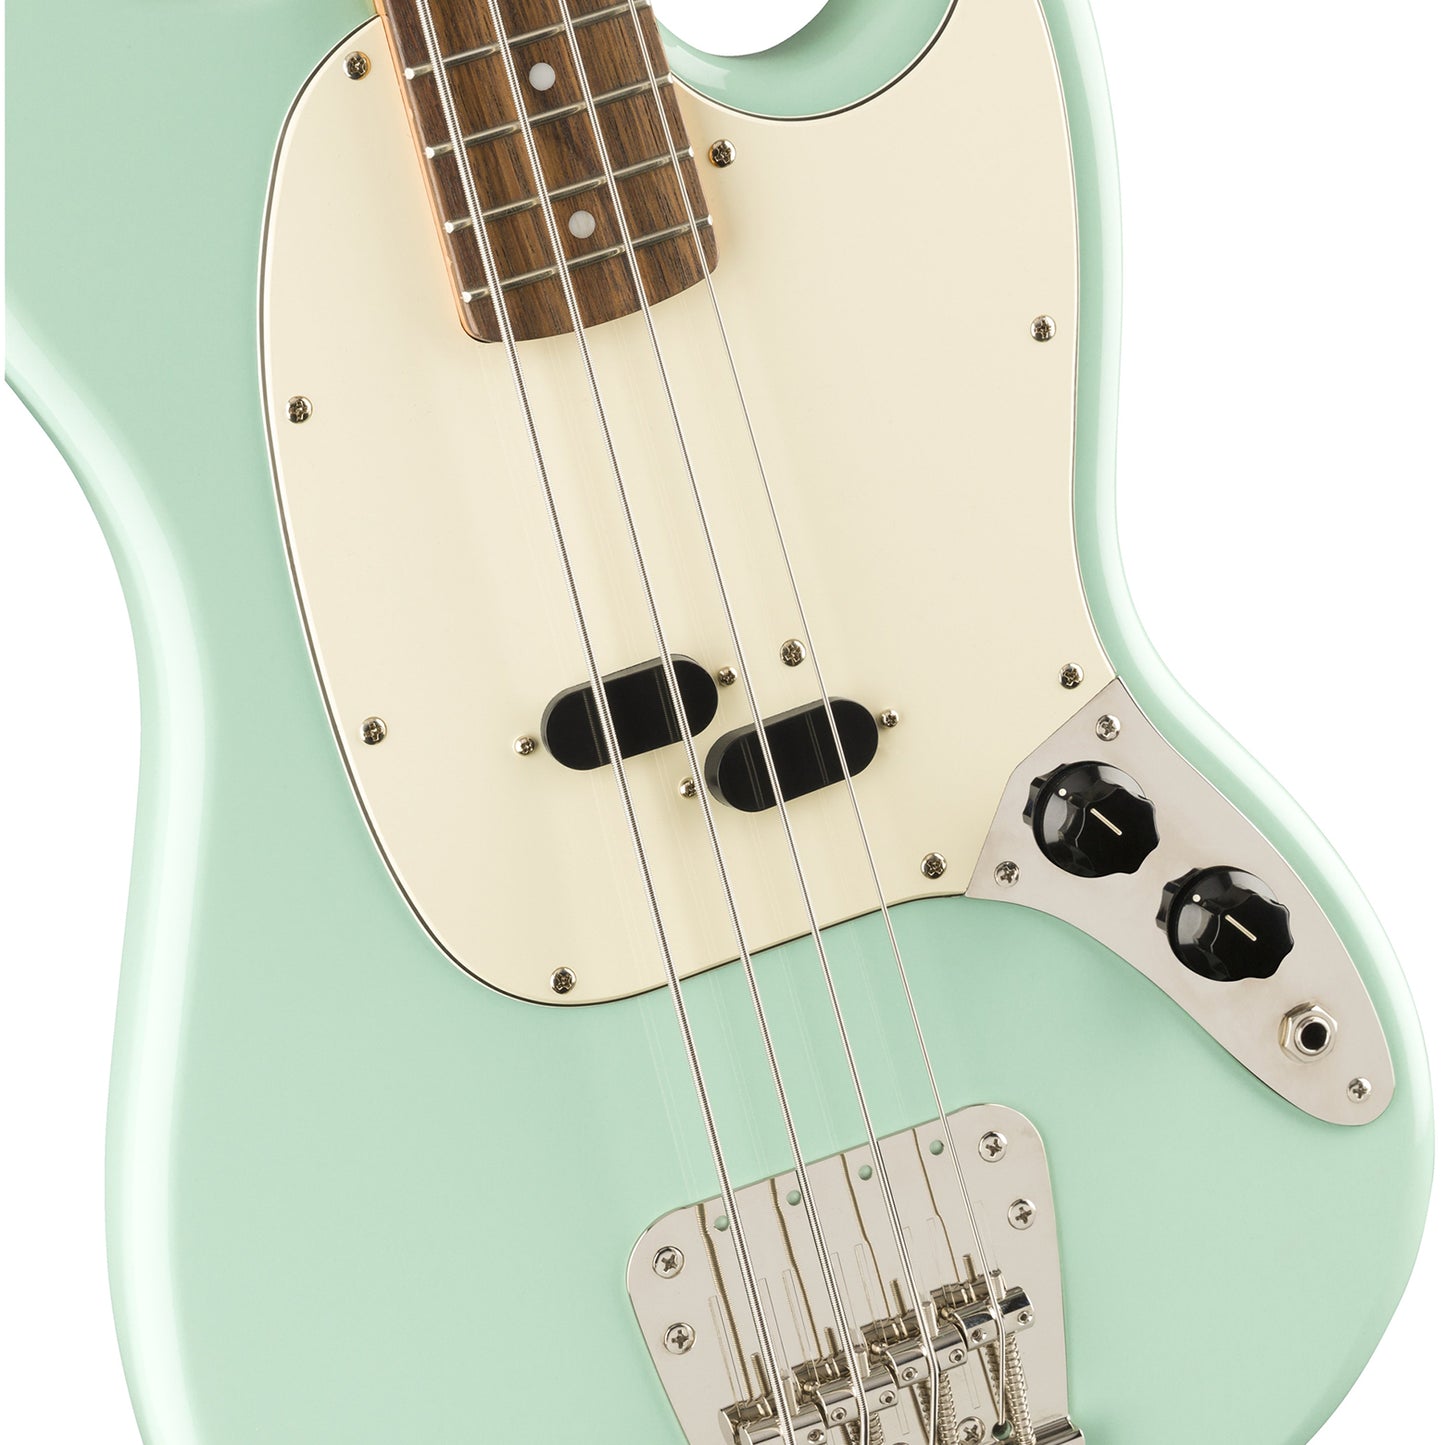 Squier by Fender Classic Vibe '60s Mustang Bass Electric Guitar Vintage Style LRL with Split Coil Pickup, Nickel Plated Hardware (White, Green)